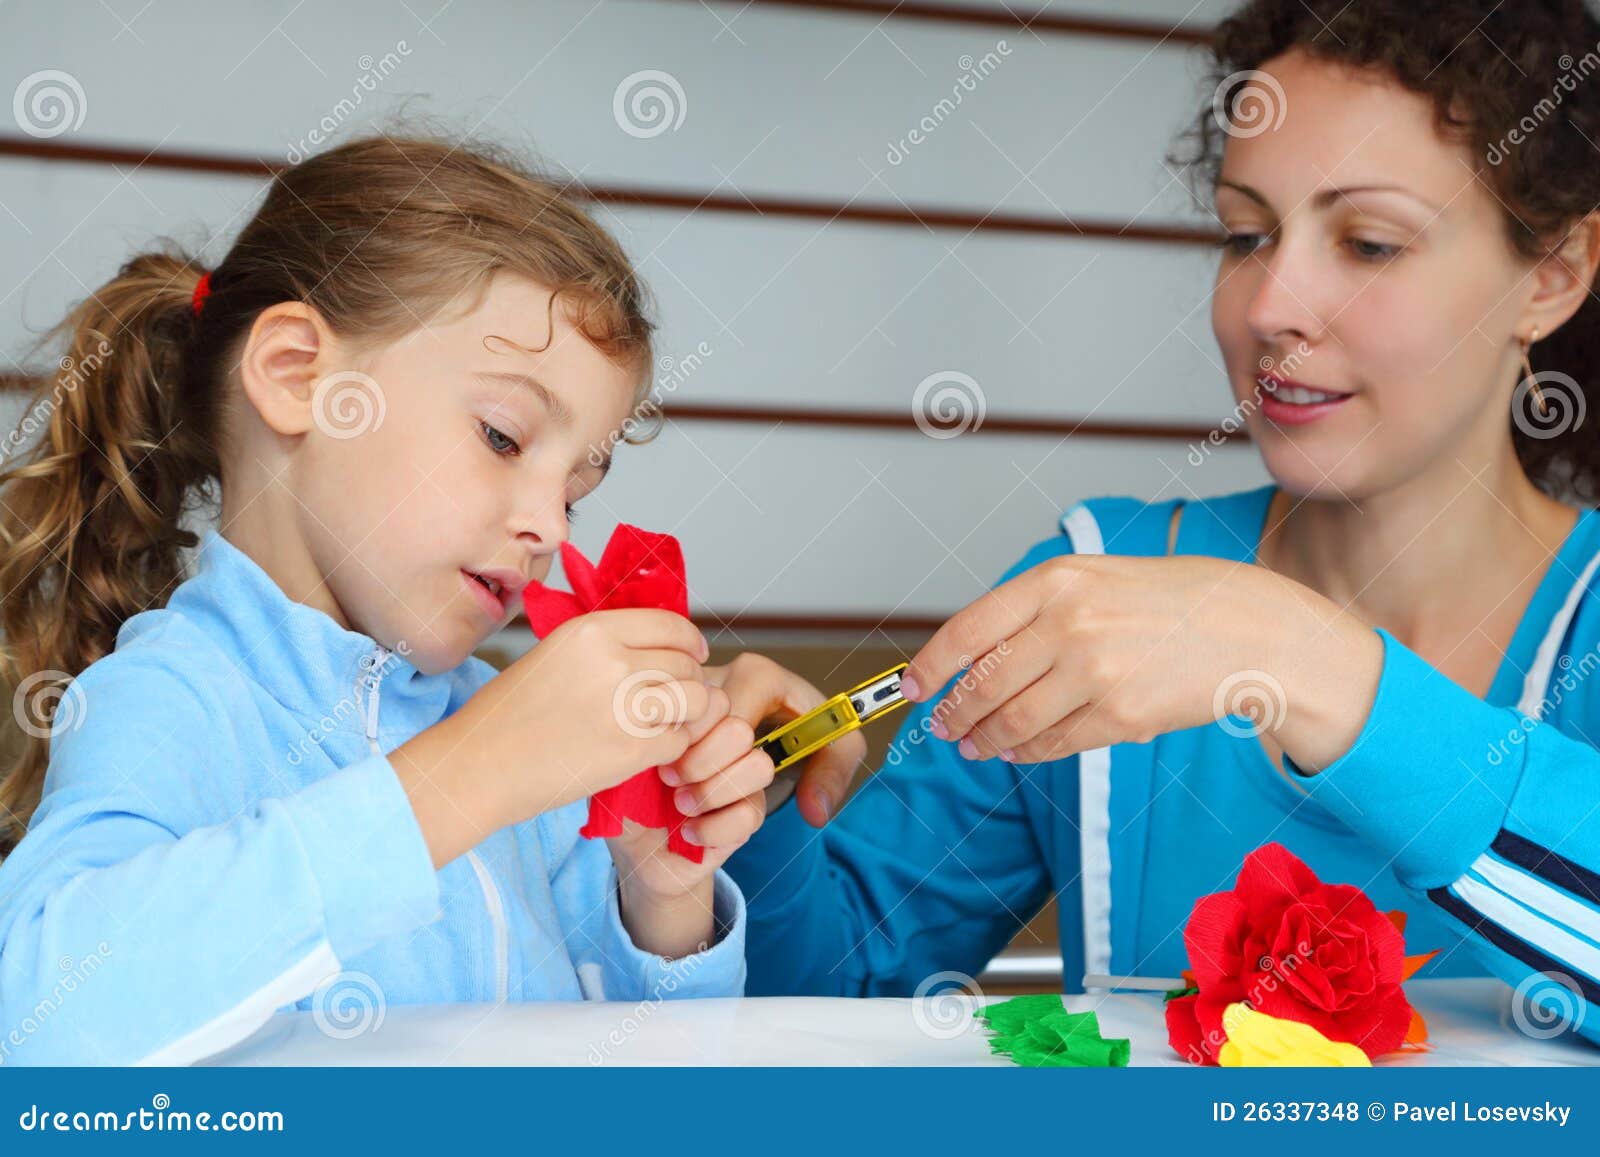 mother and daughter make artificial roses